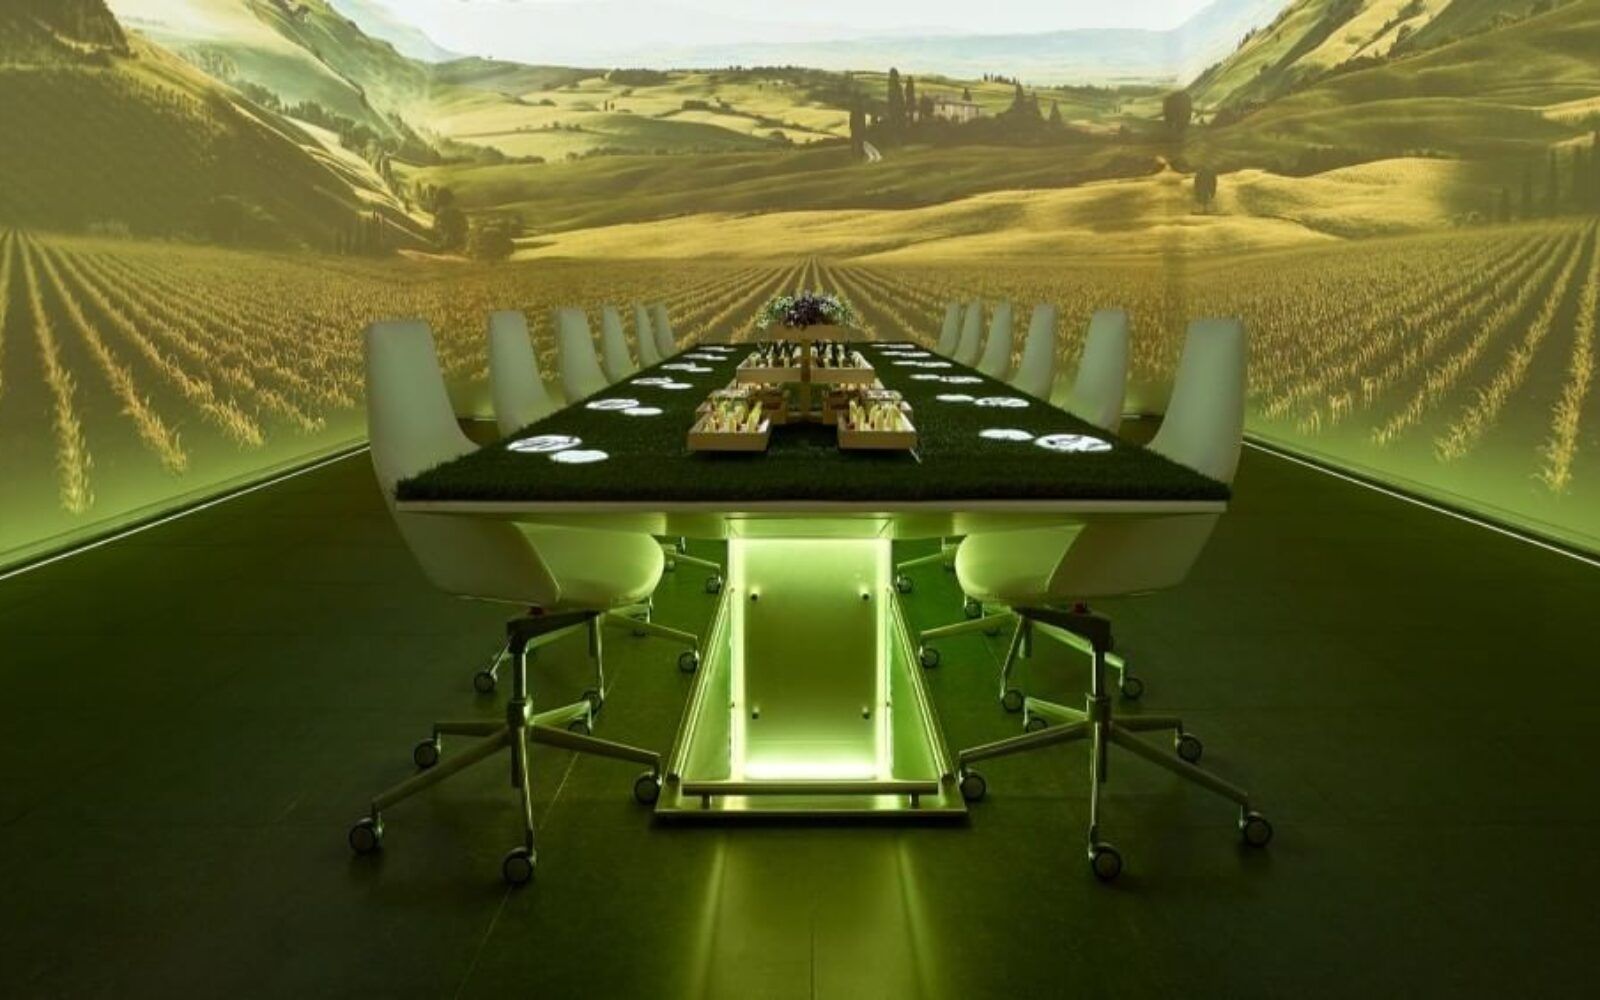 Sublimotion is an unparalleled multi-sensory journey, offering just 12 diners round one table an unp